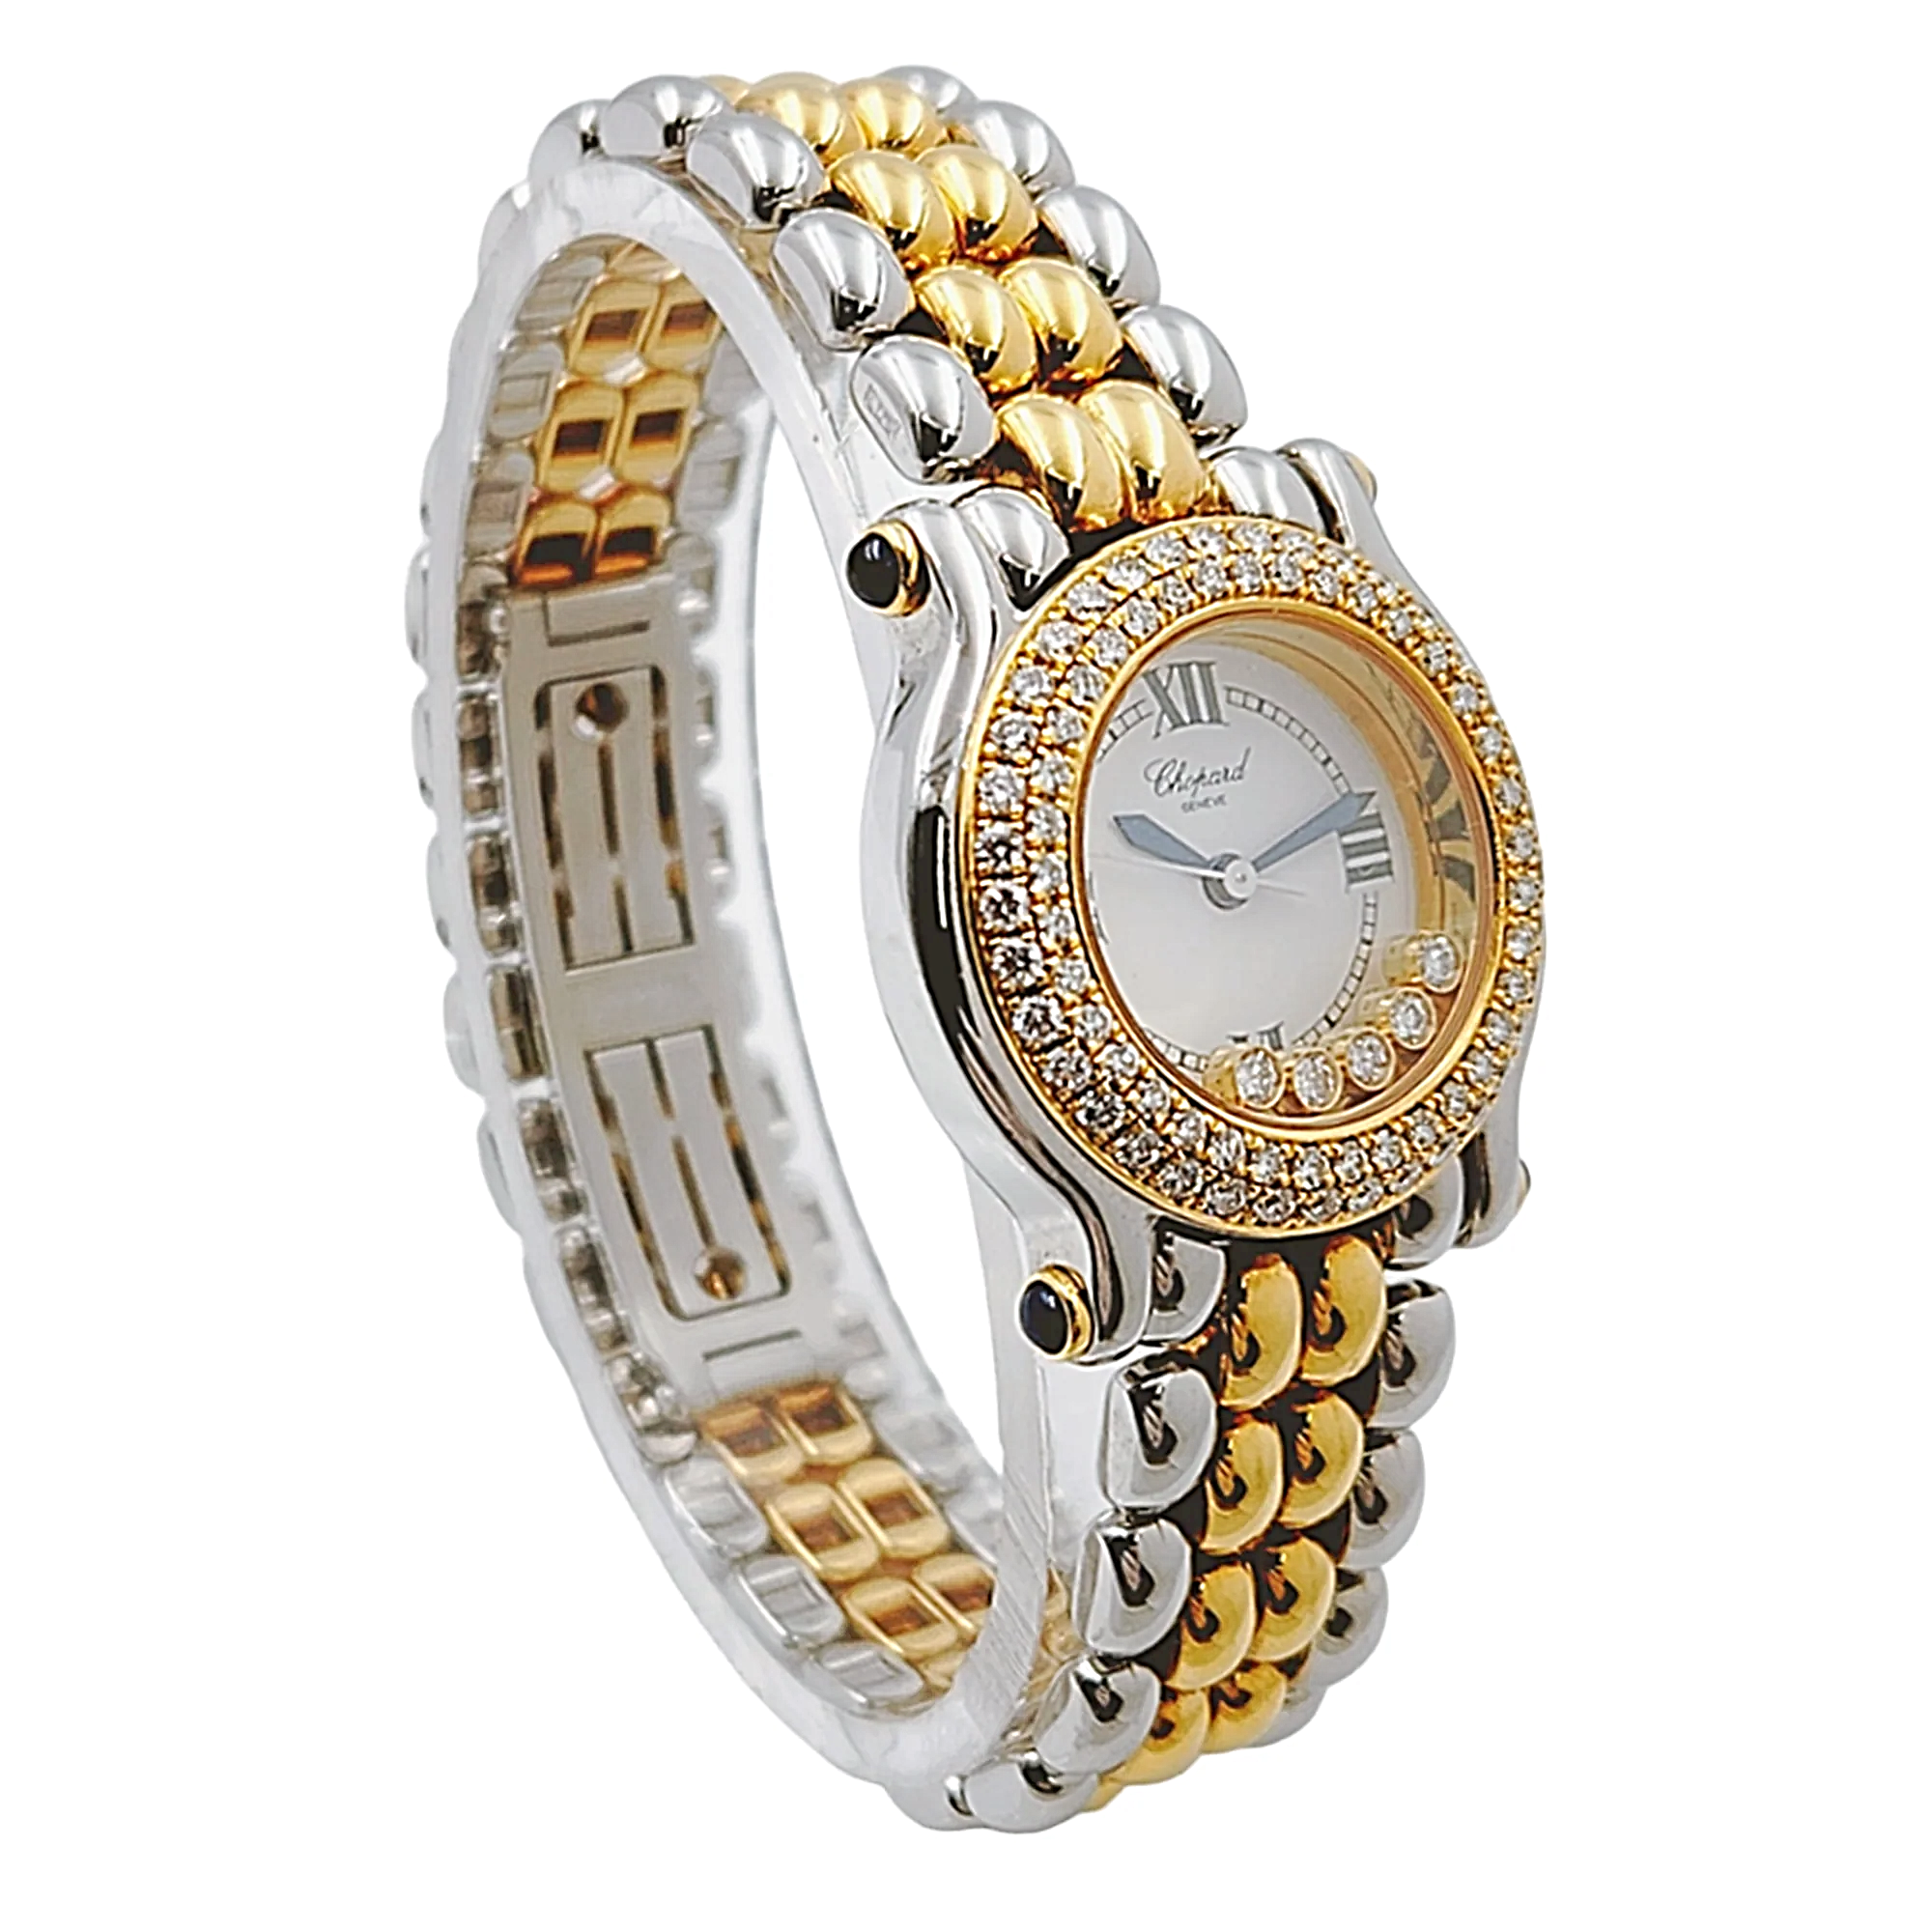 *Ladies Chopard 26mm Happy Sport Five Diamond 18K Yellow Gold / Stainless Steel Watch with White Dial and Diamond Bezel. (Pre-Owned 27/8251-23)